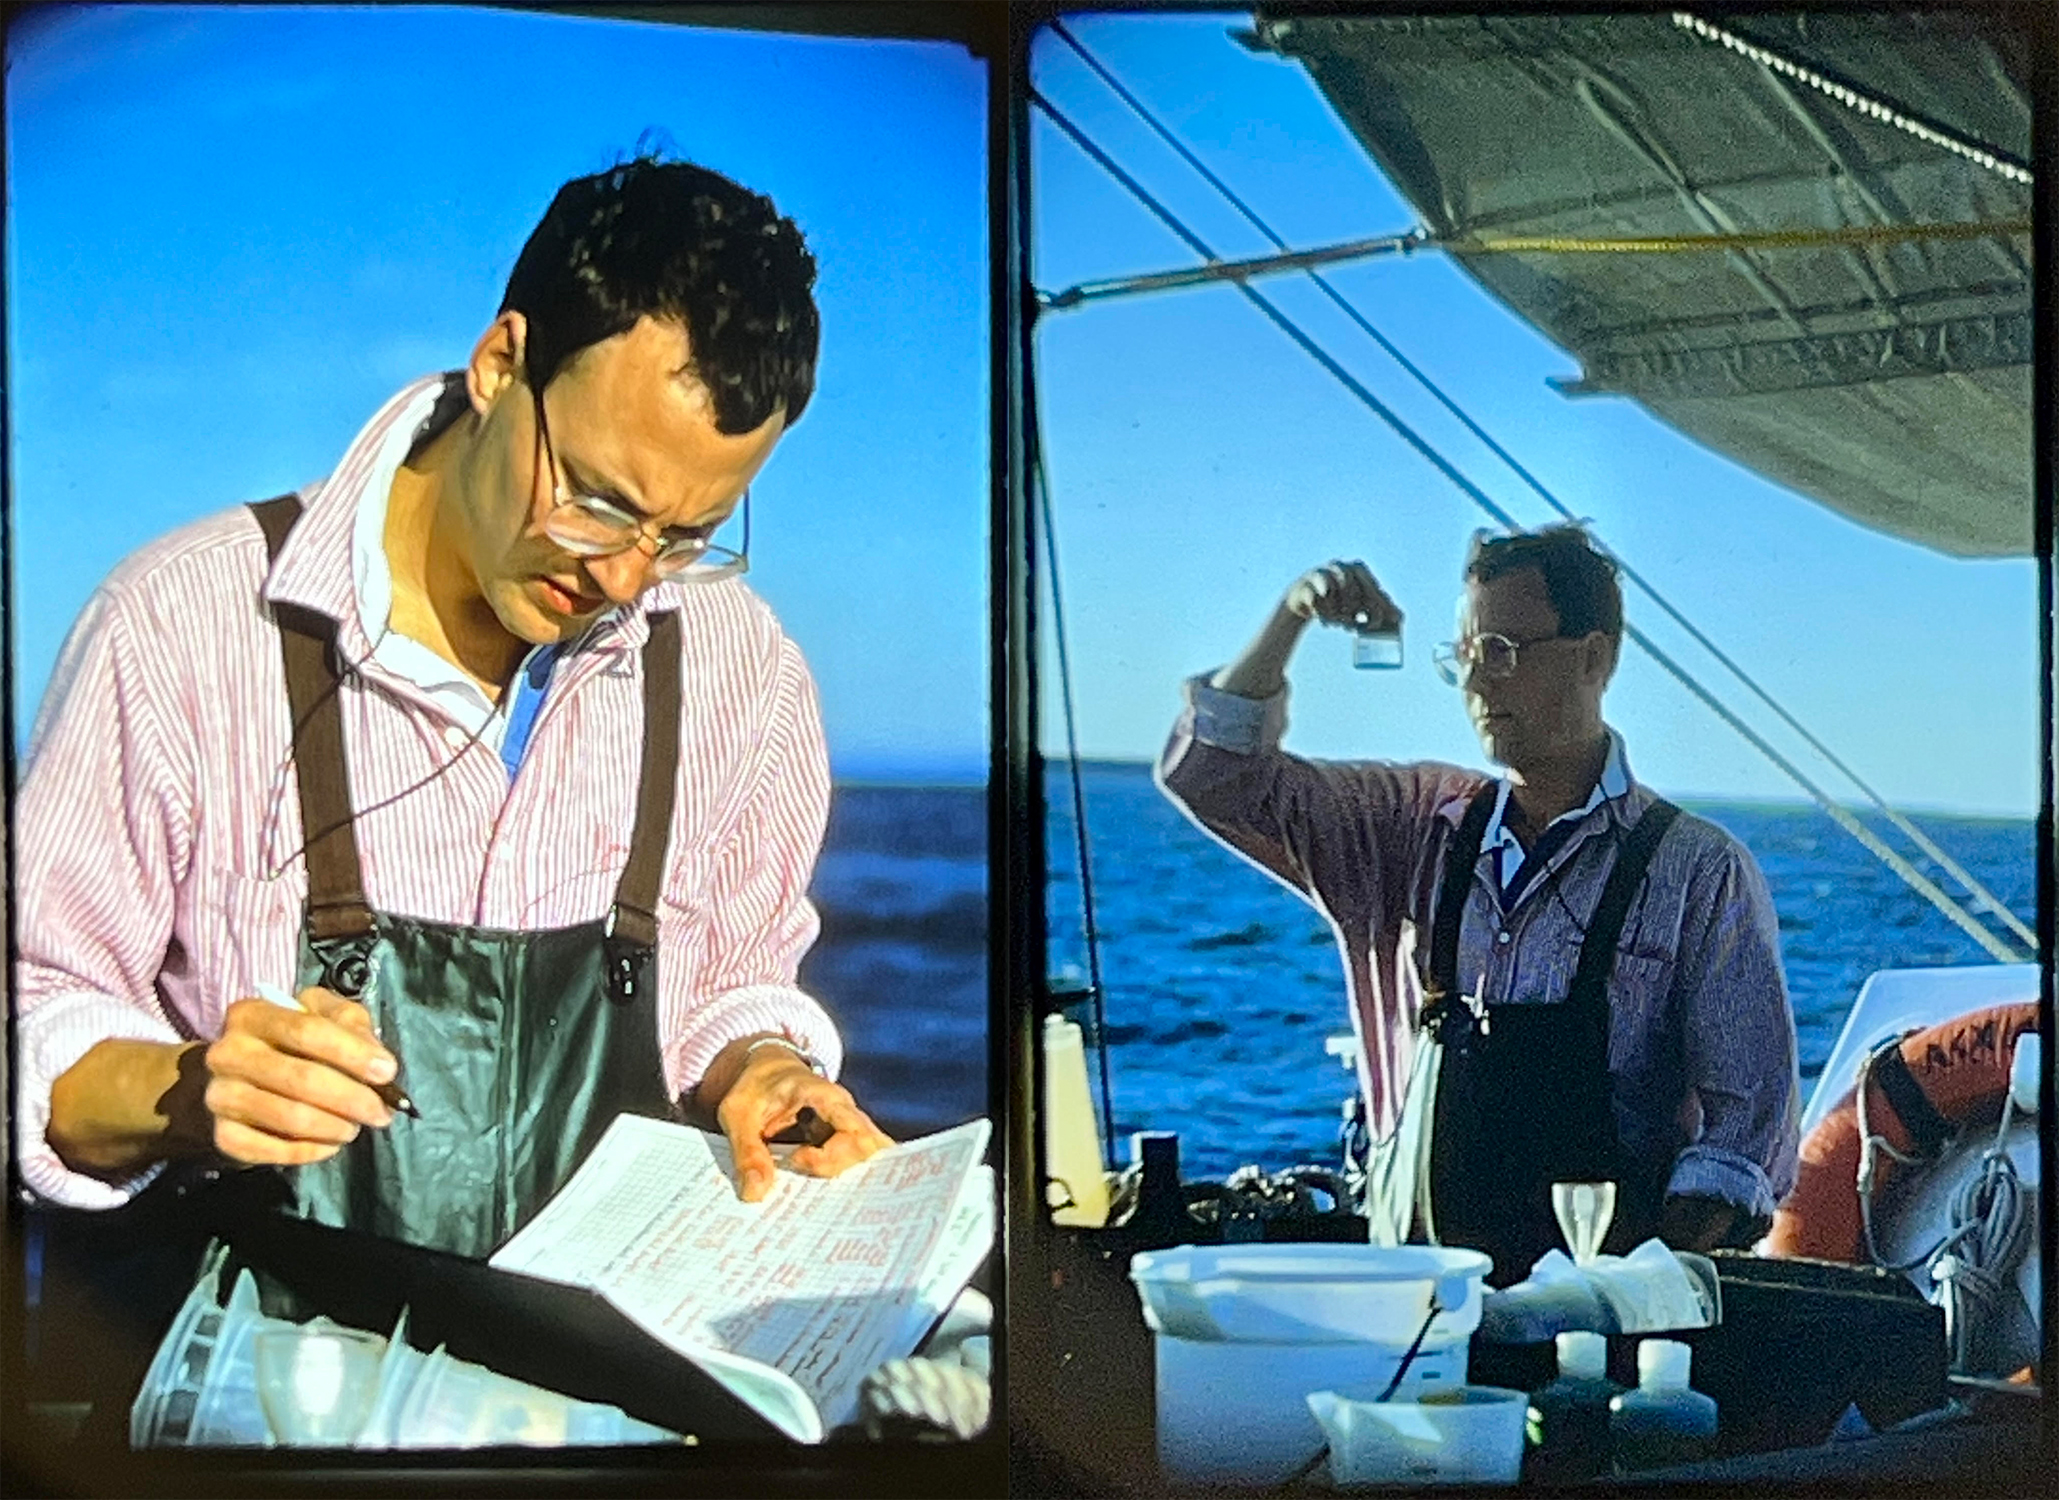 "Jacques White taking notes and collecting data on a research vessel"